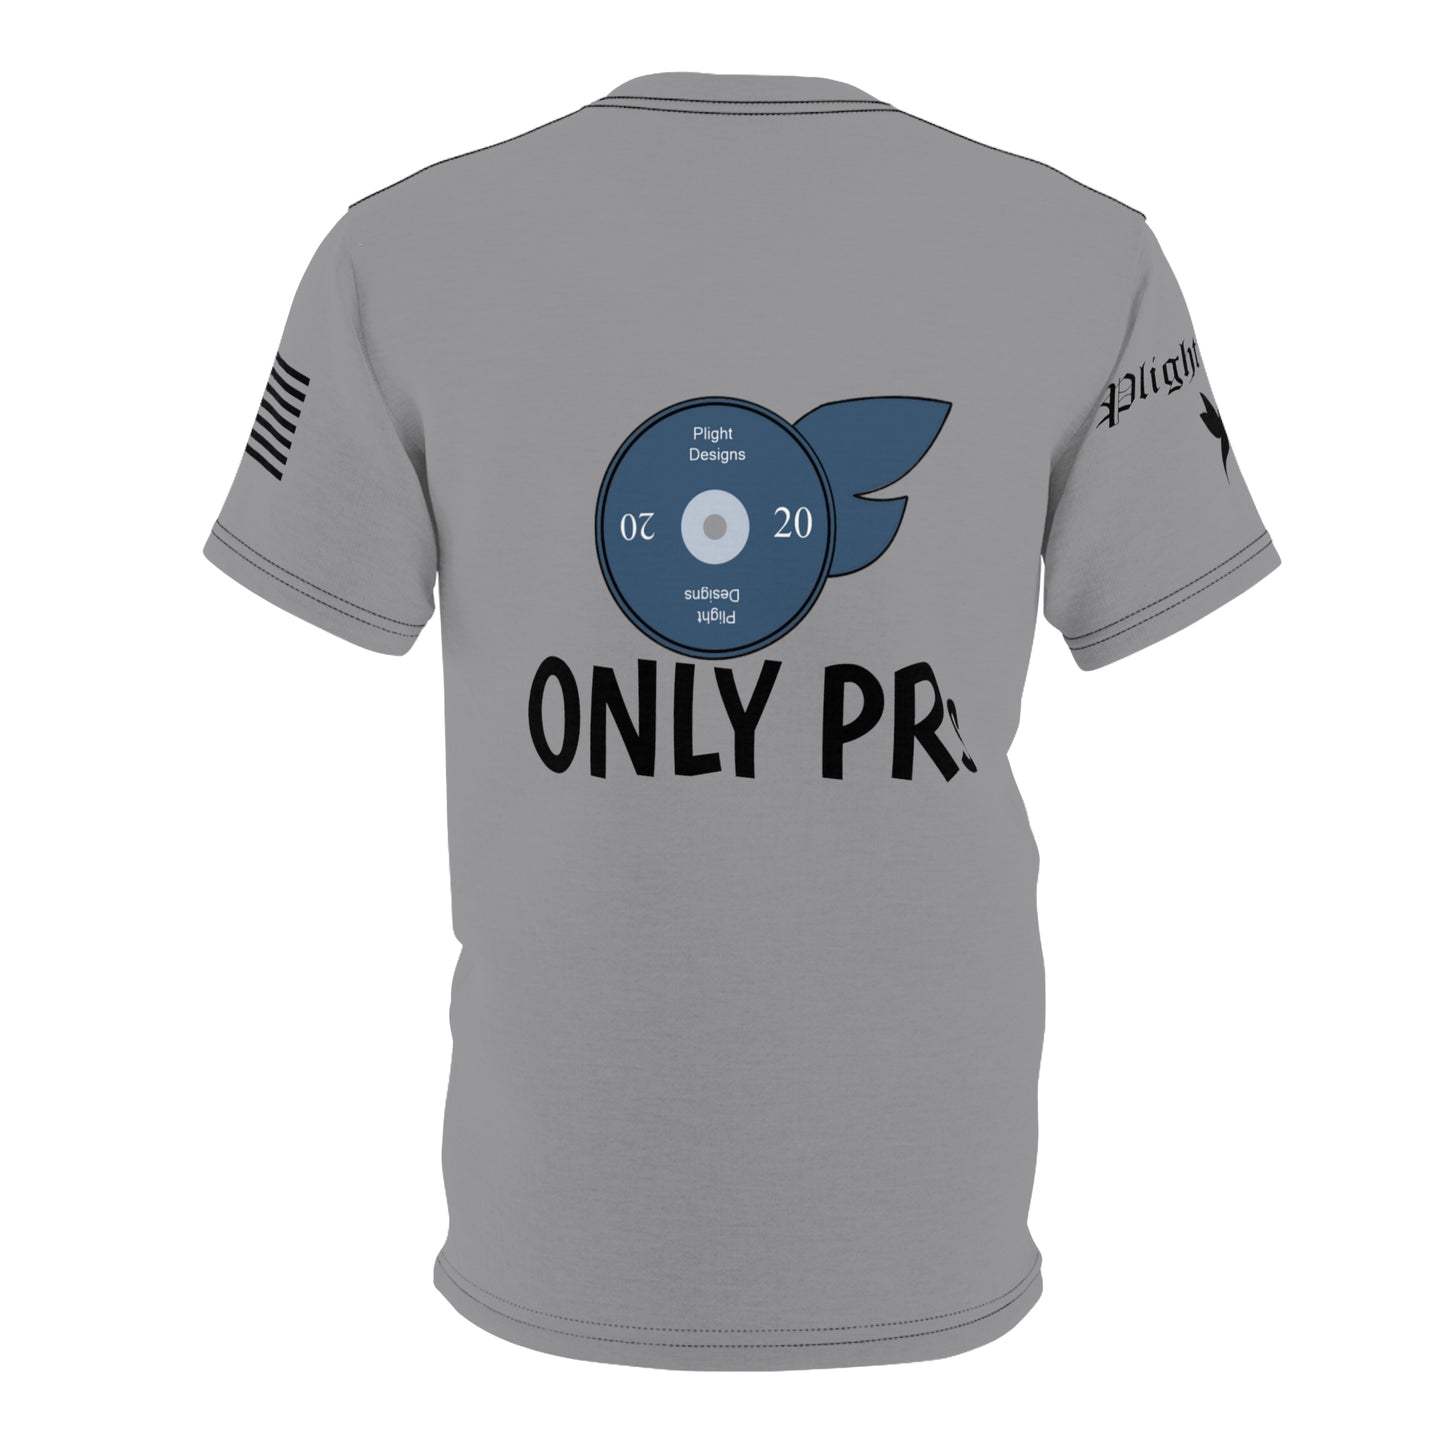 Only PRs Unisex shirt